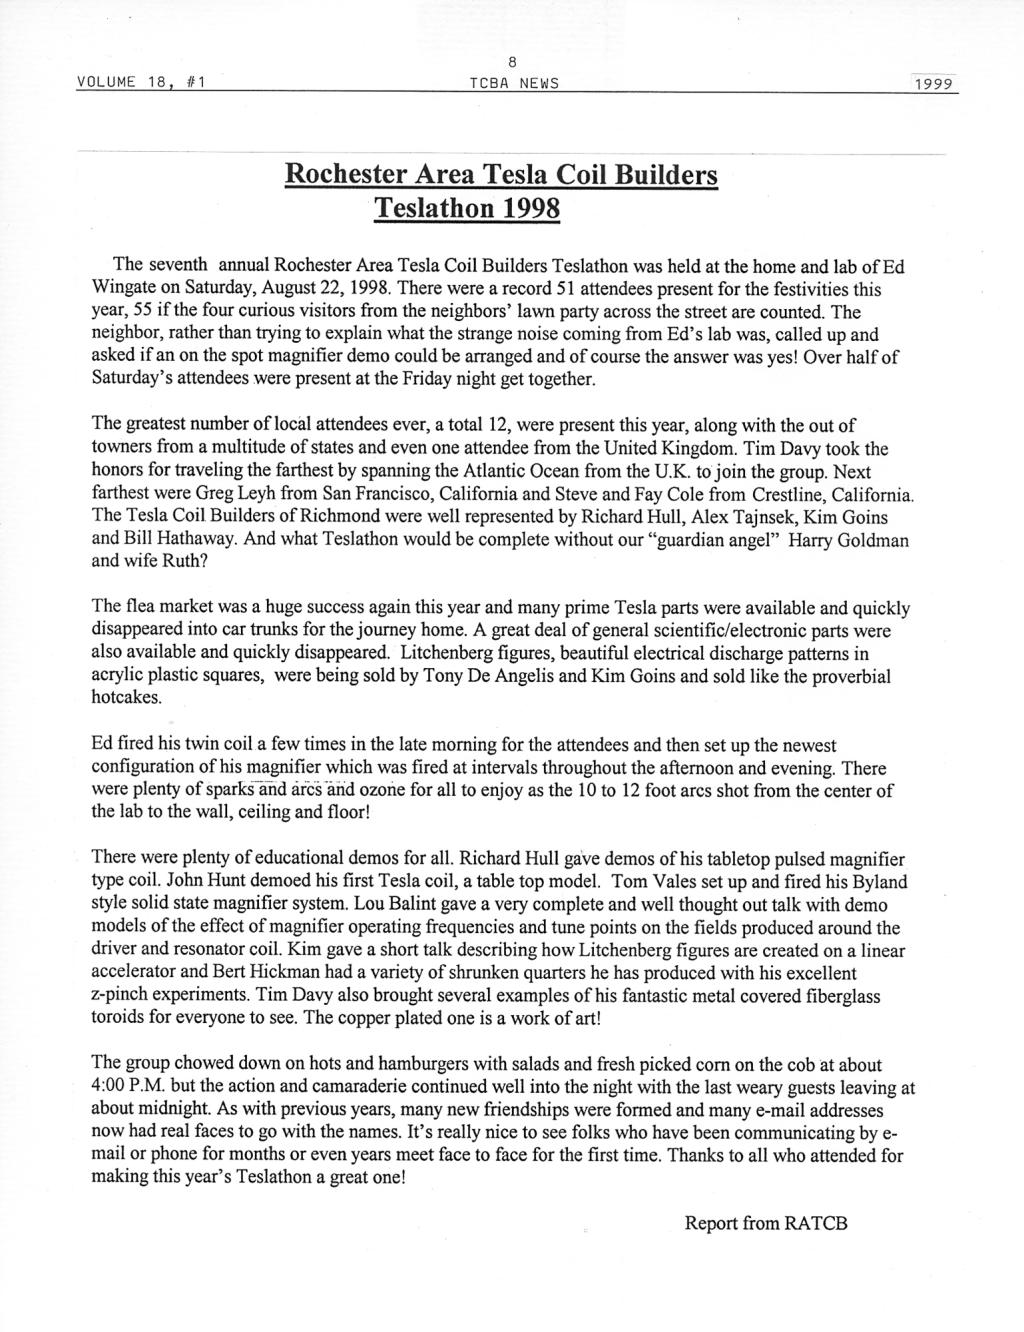 TCBA Volume 18 - Issue 1 - Page 8 of 18